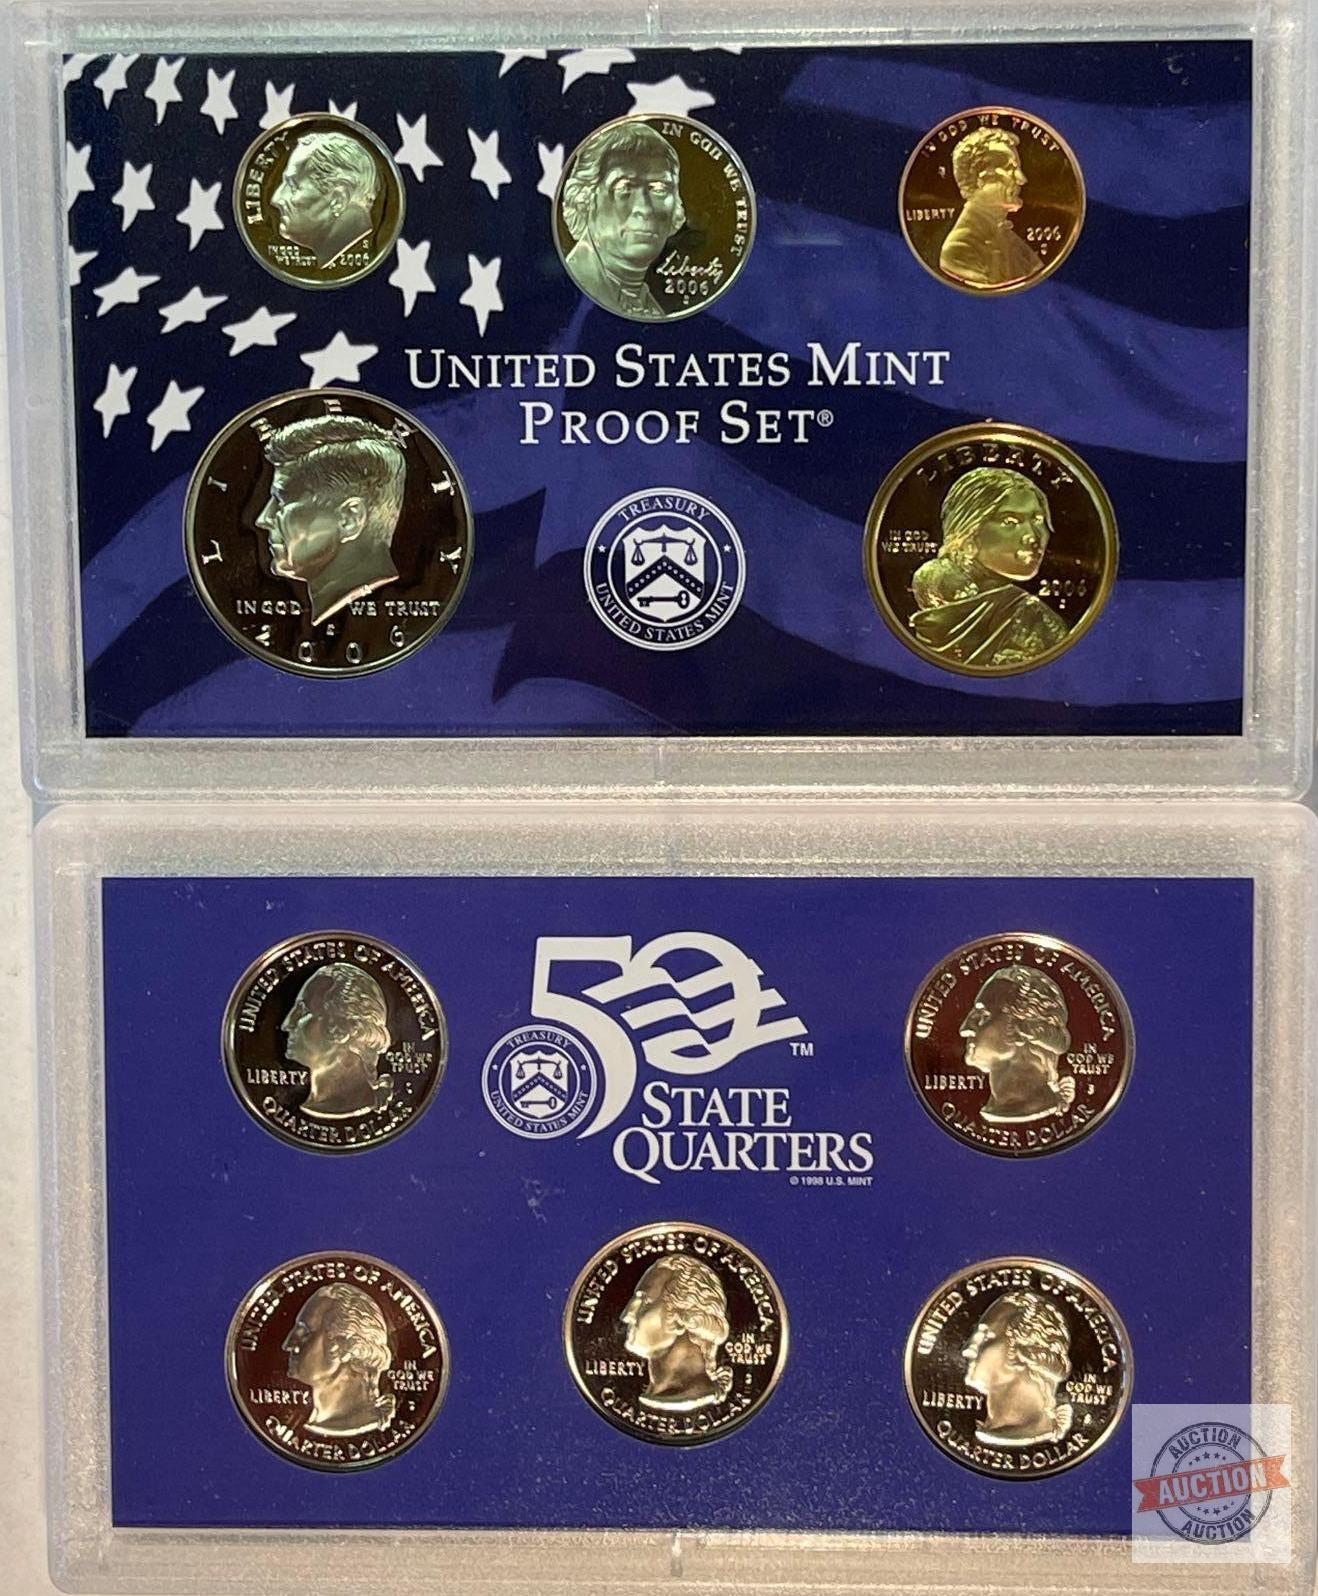 US Mint Proof Set 2006s, 2 case, 10 coin set in hard plastic protective